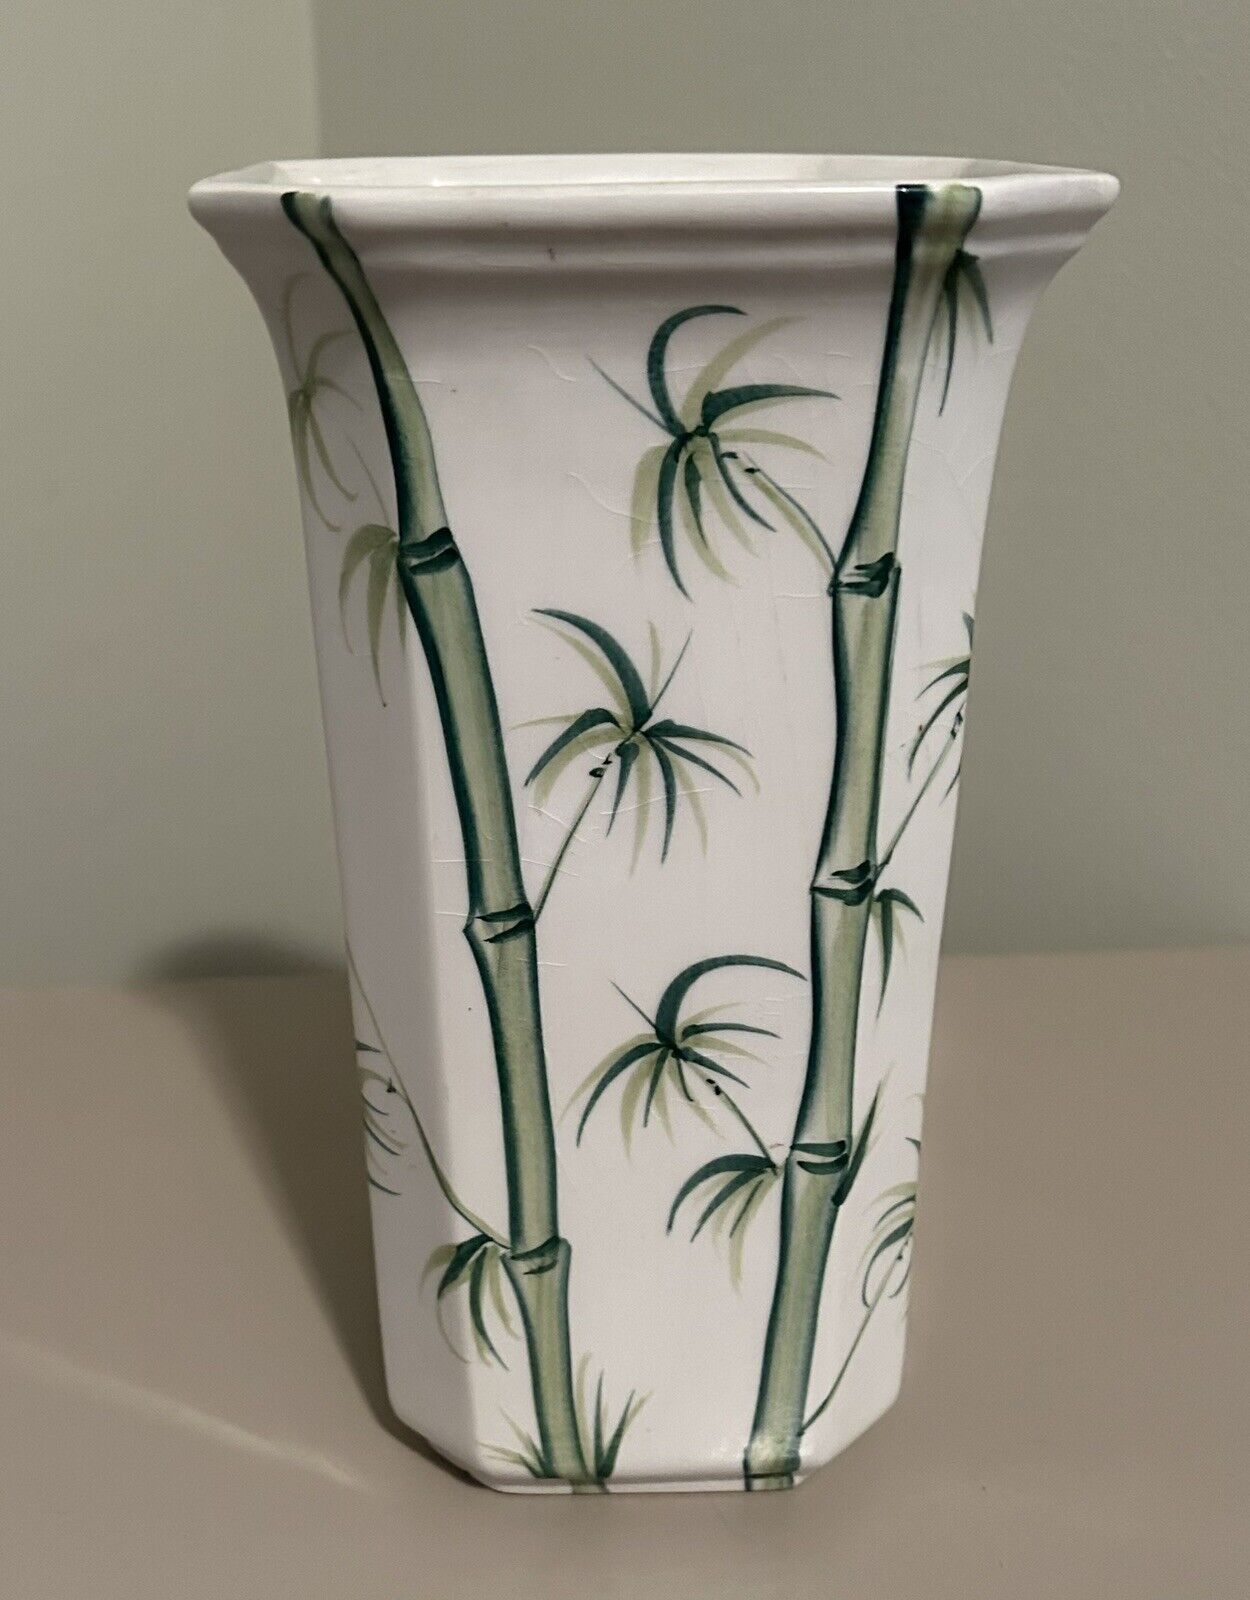 Hand Painted Vase bamboo pattern Made In Italy By Artist Ceramiche Leonardo.